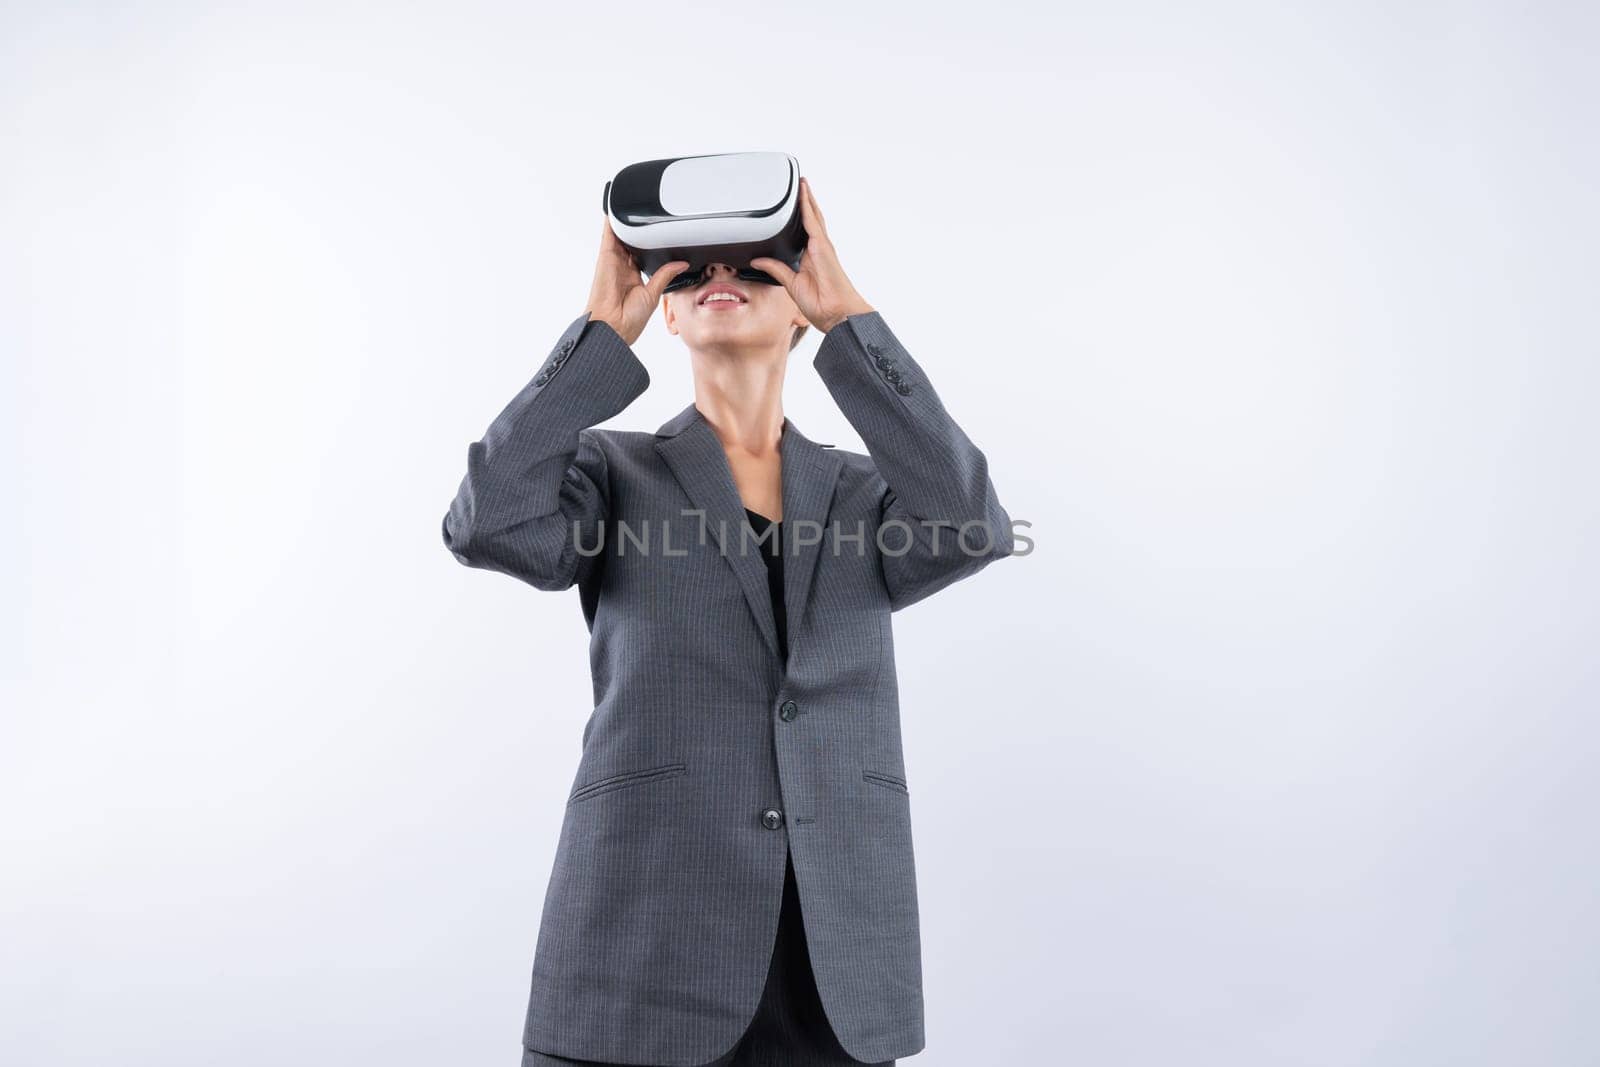 Skilled businesswoman looking at visual reality world by using VR glass while standing at background. Smart manager holding VR goggle to connect metaverse by using technology innovation. Contraption.